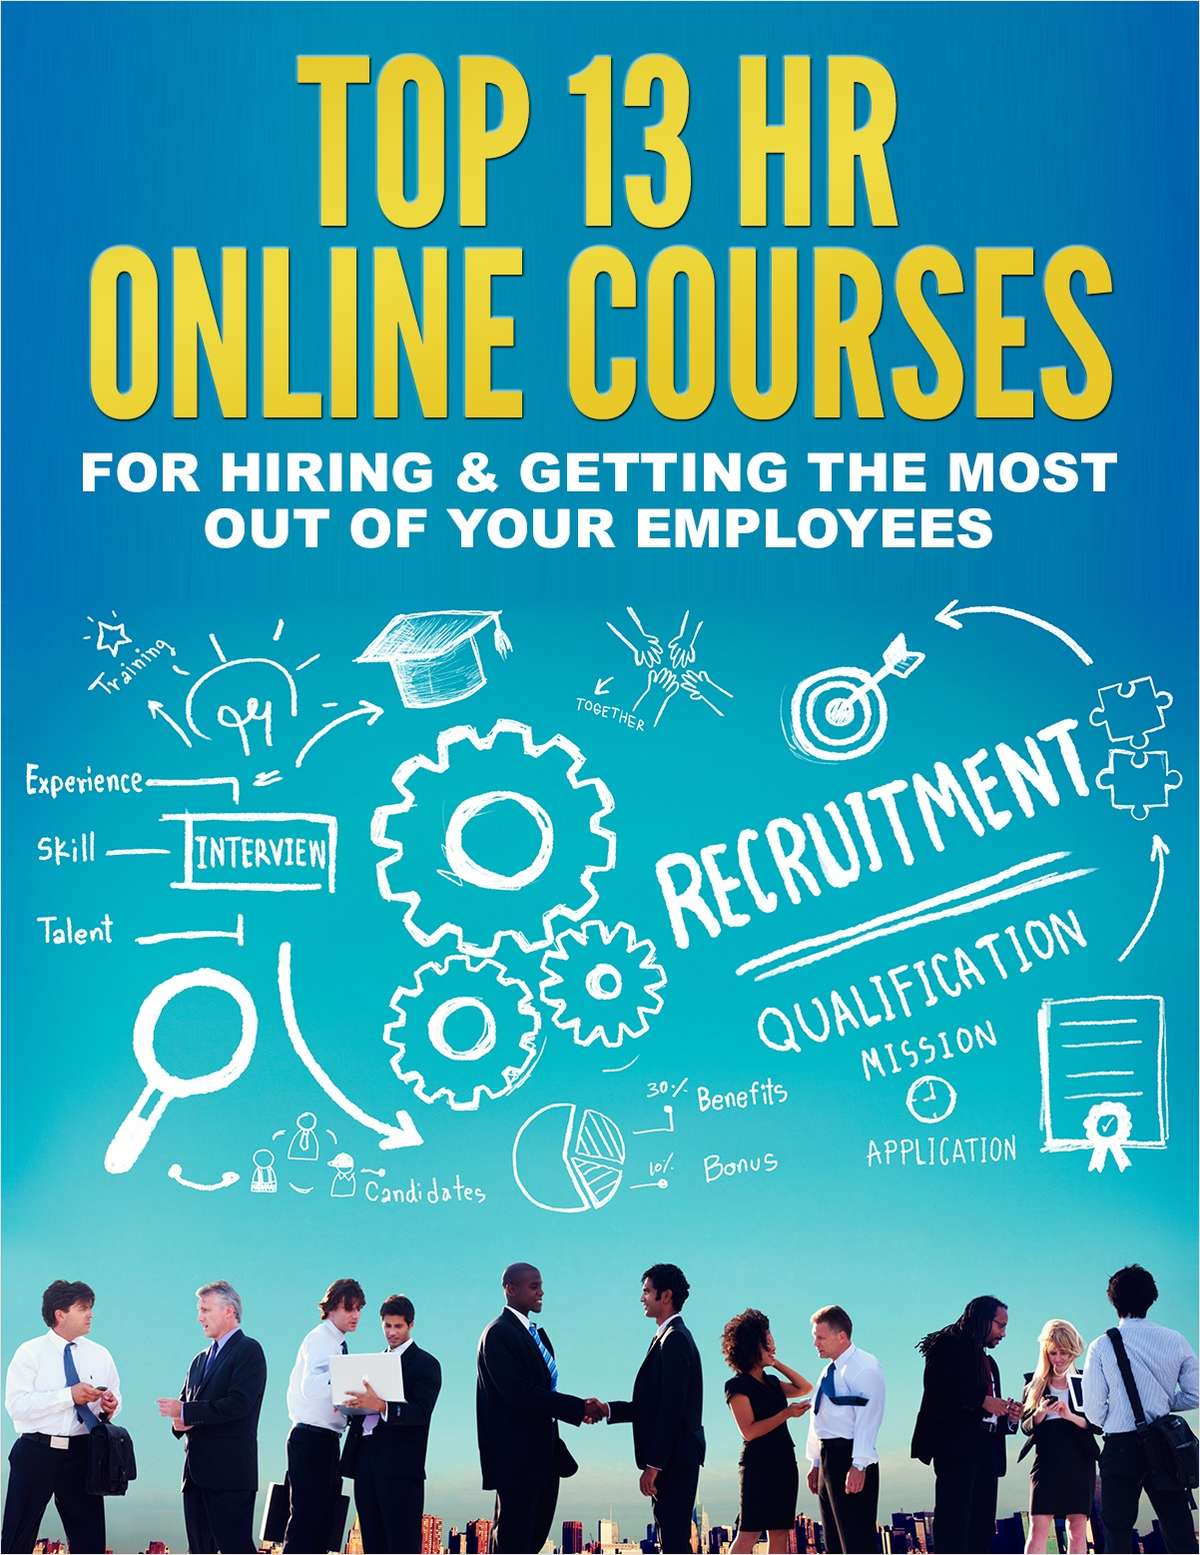 Top 13 HR Online Courses for Hiring & Getting the Most Out of Your Employees